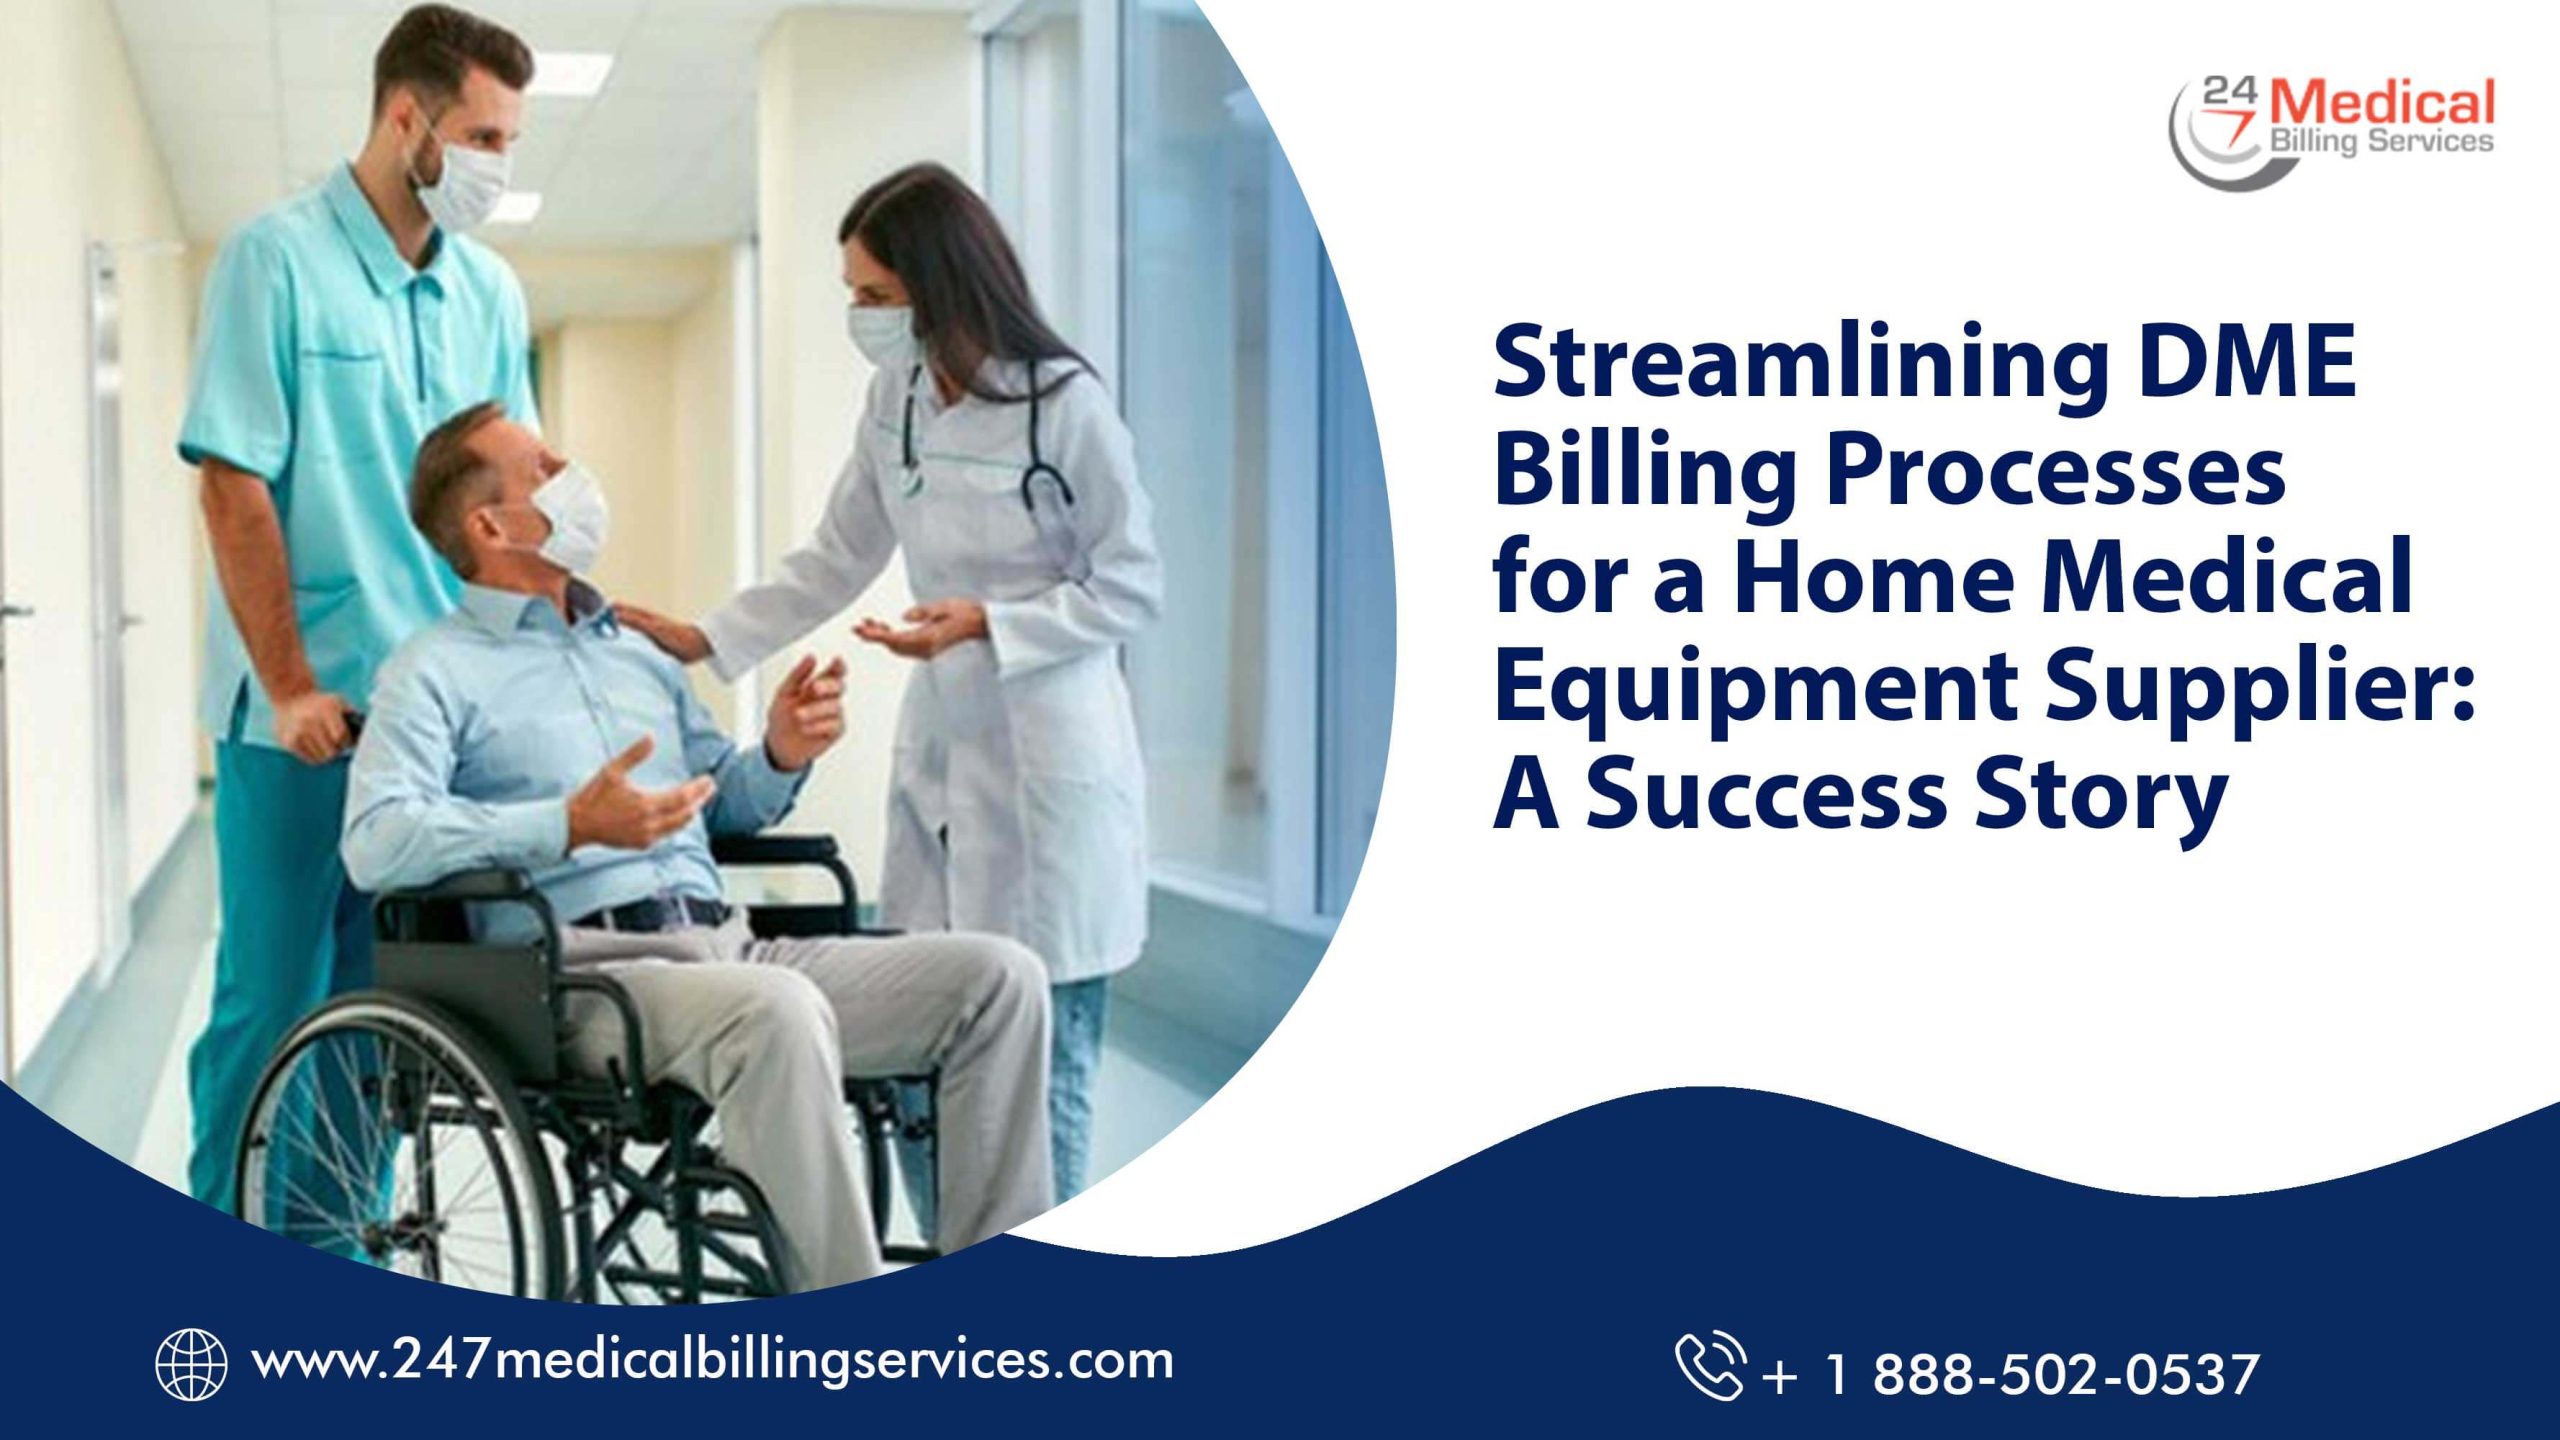  Streamlining DME Billing Processes for a Home Medical Equipment Supplier: A Success Story